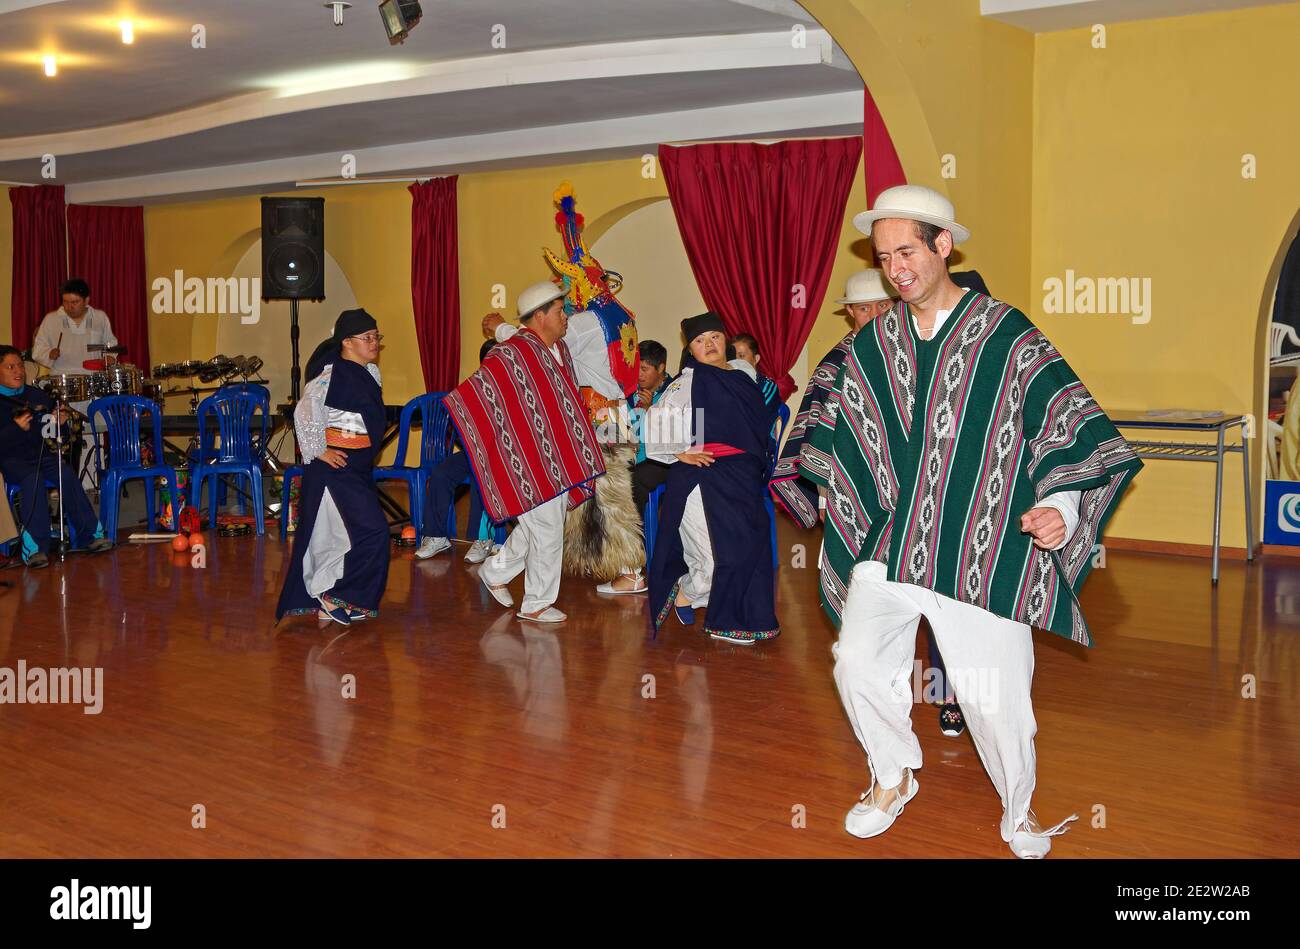 musical show, band, performance, native costumes, student dancers, movement, motion, Sinamune Disabled Children's School, South America, Quito, Ecuado Stock Photo